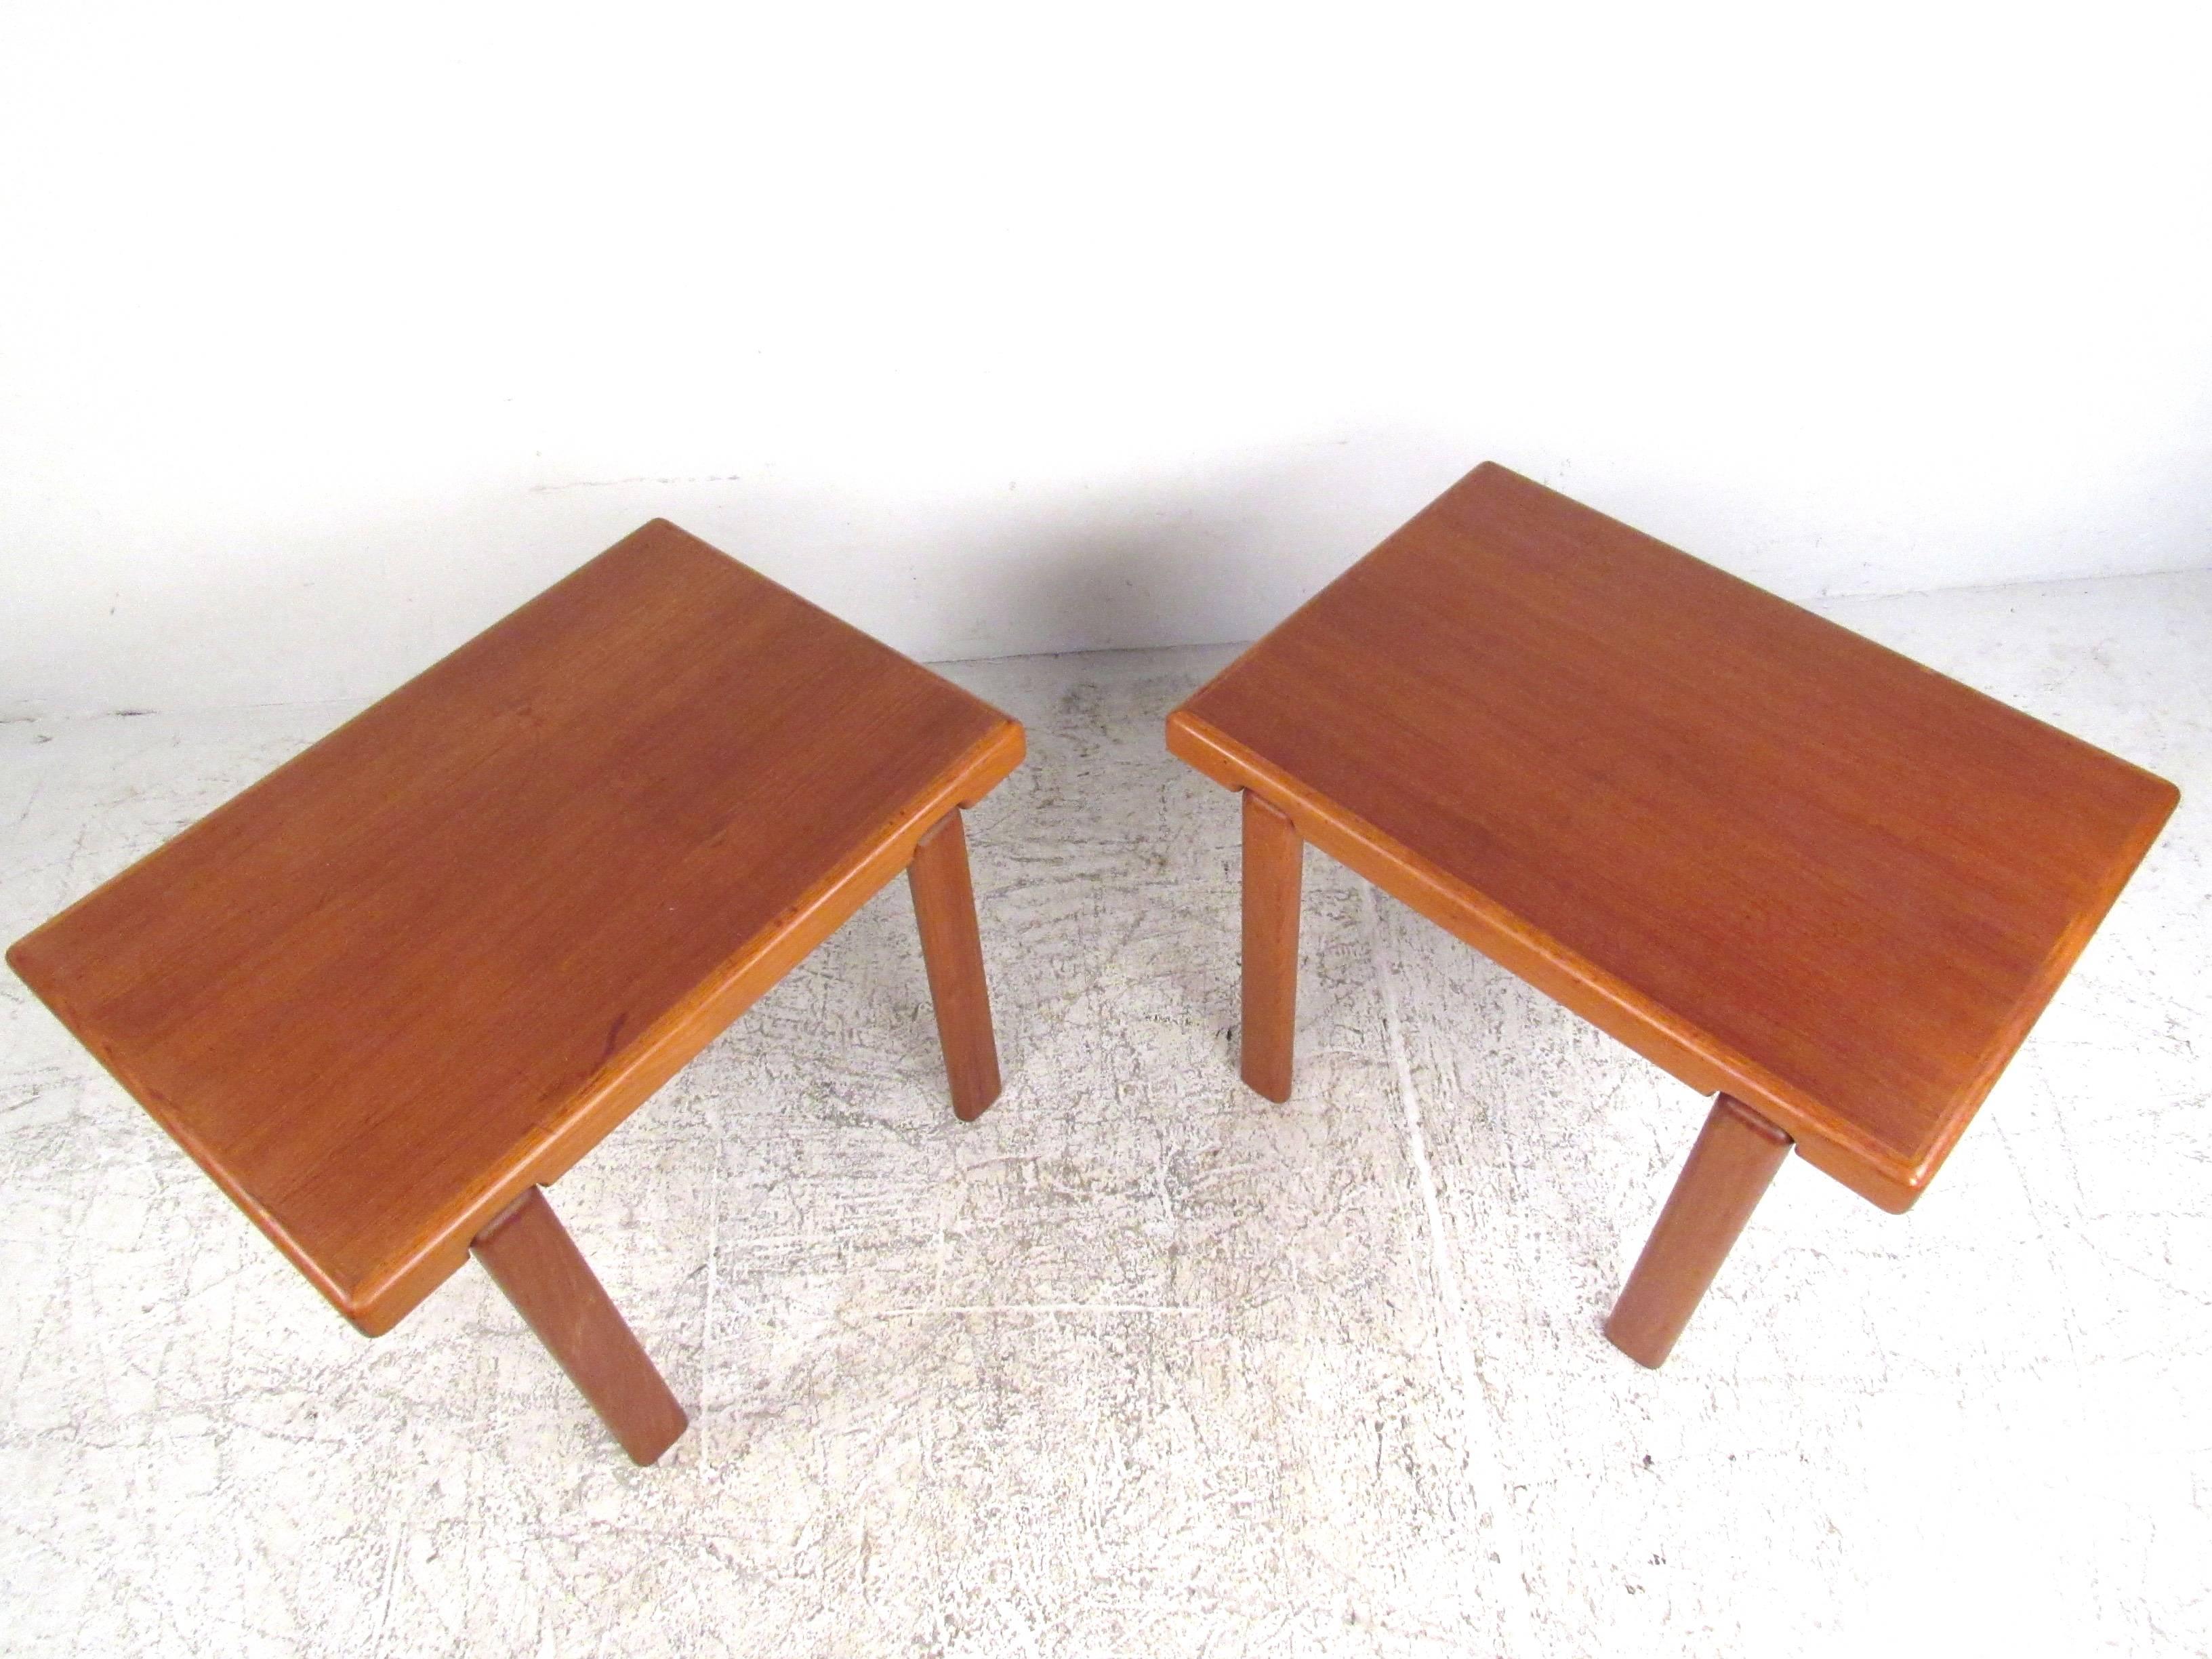 This matching pair of vintage teak end tables features quality teak construction with unique legs and finish. The perfect height for use as end tables, sofa side tables, or simply for occasional display use. Please confirm item location (NY or NJ).